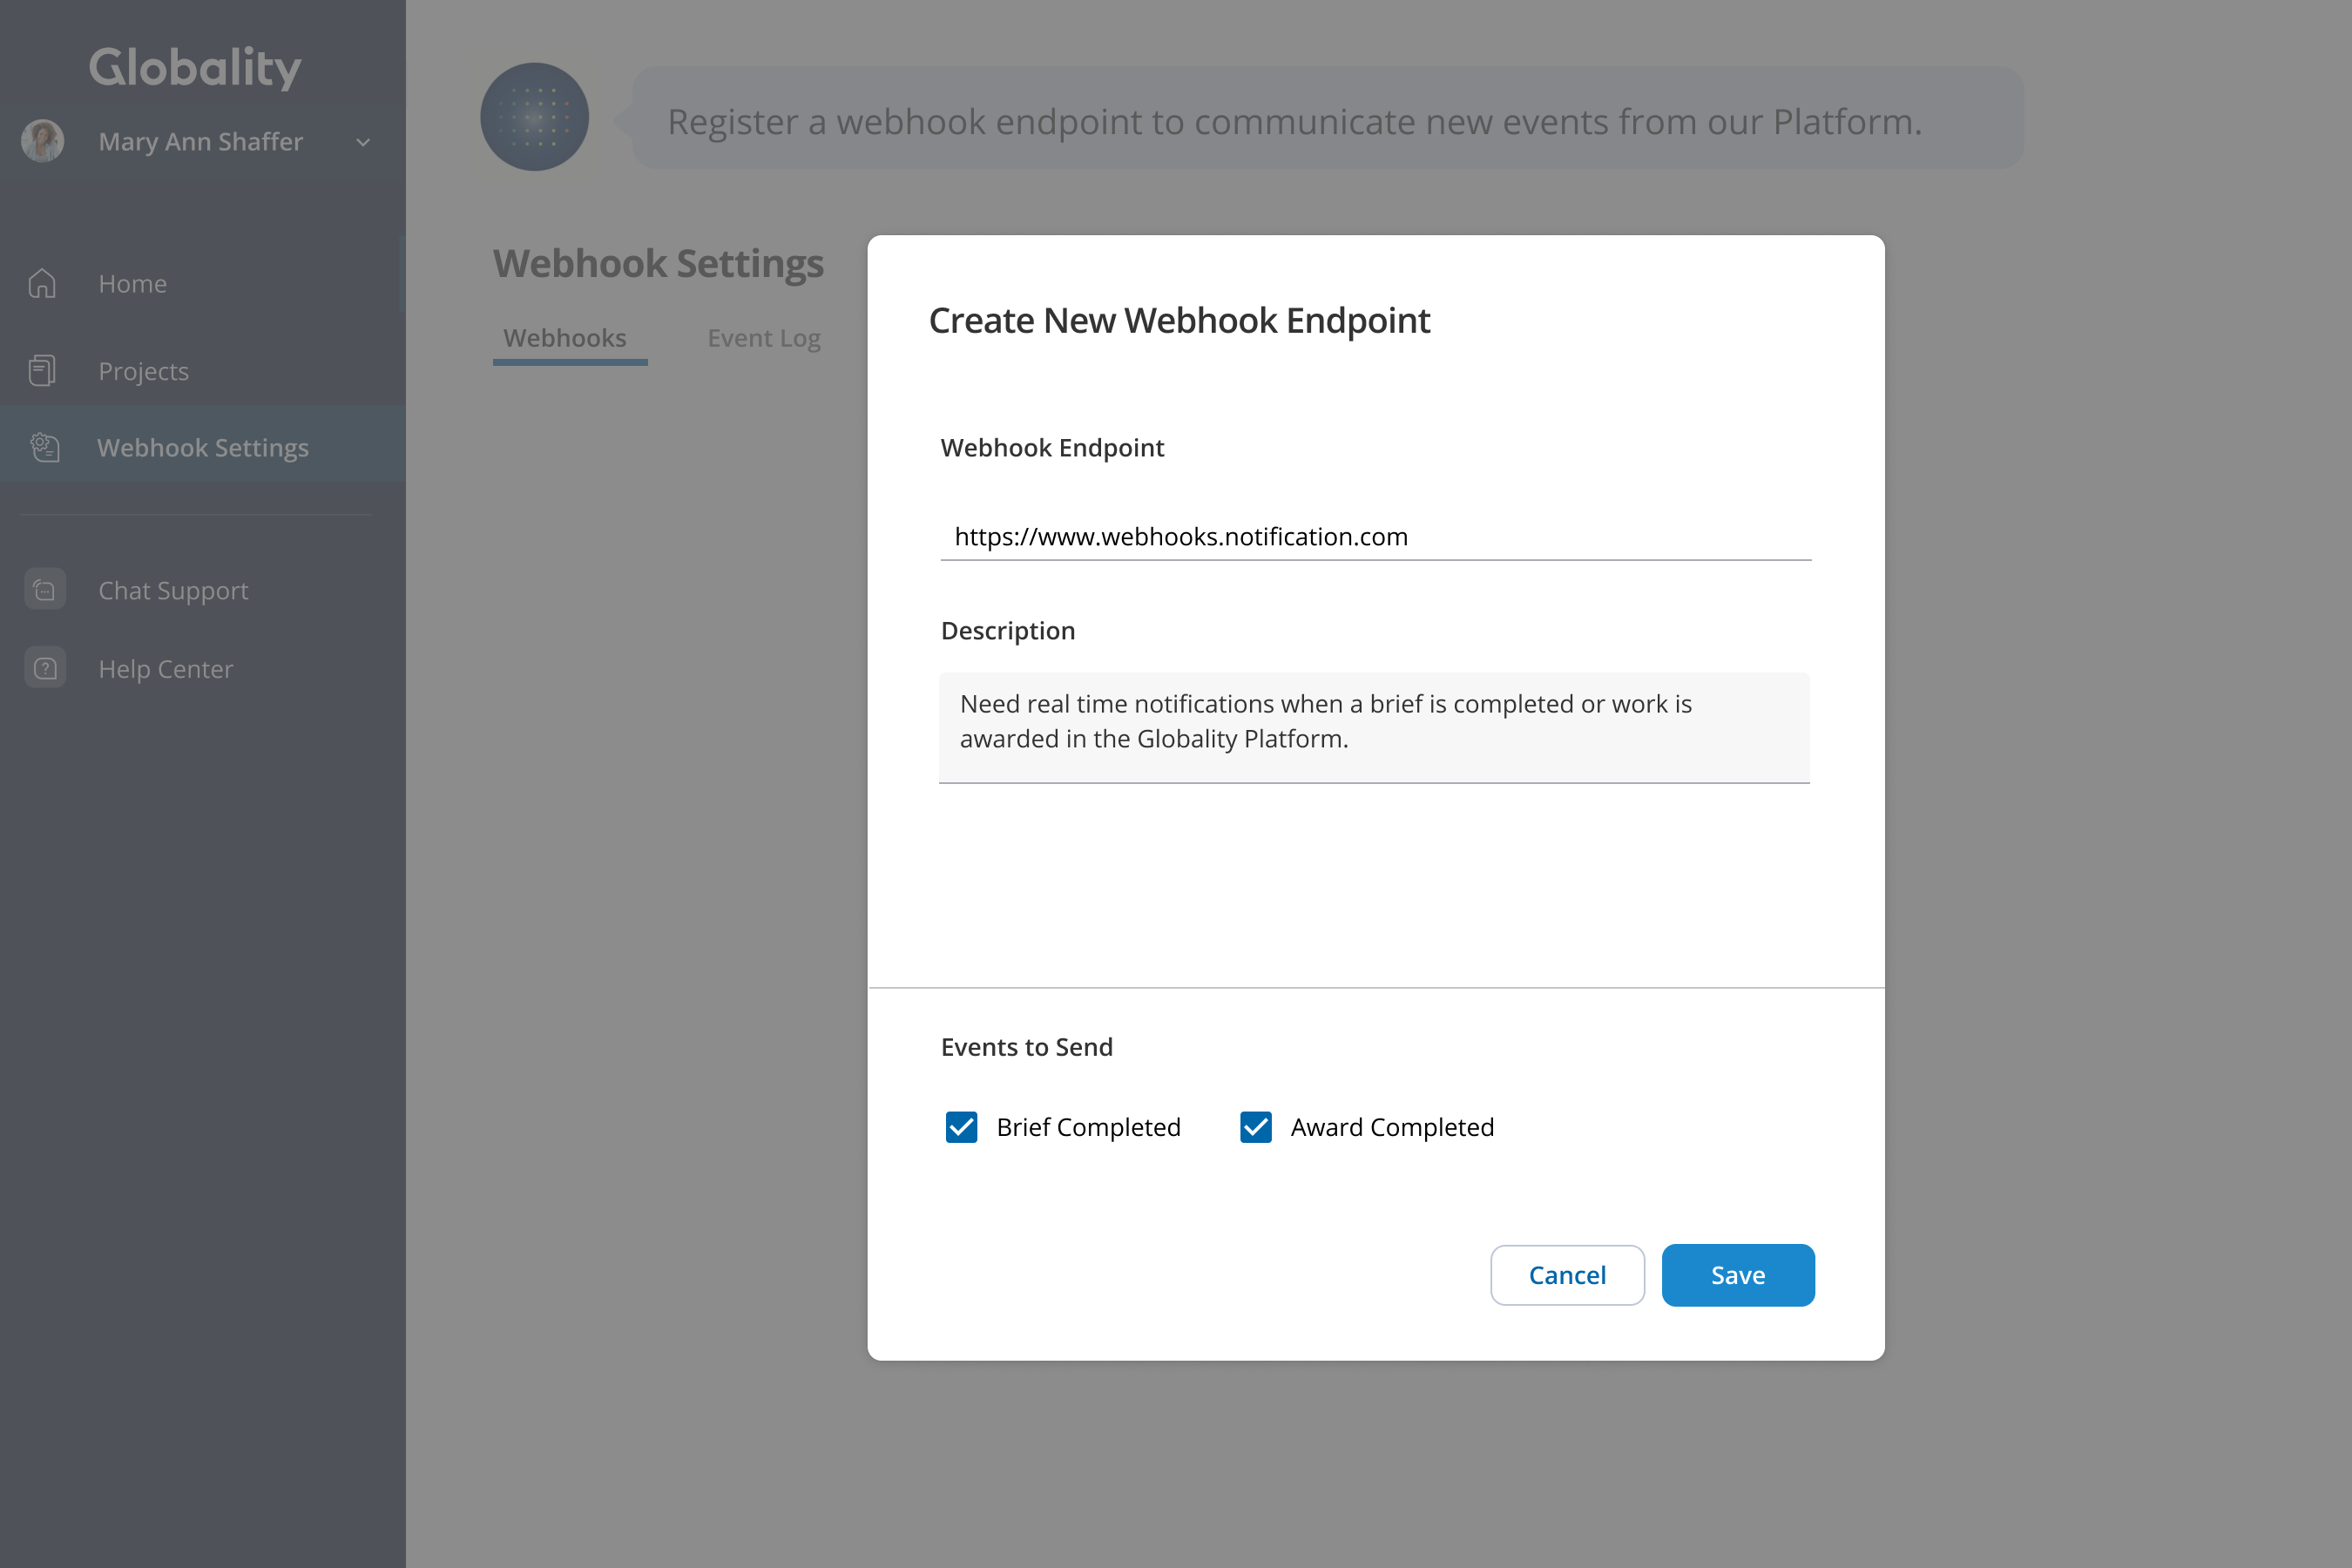 Webhook Settings - Completed